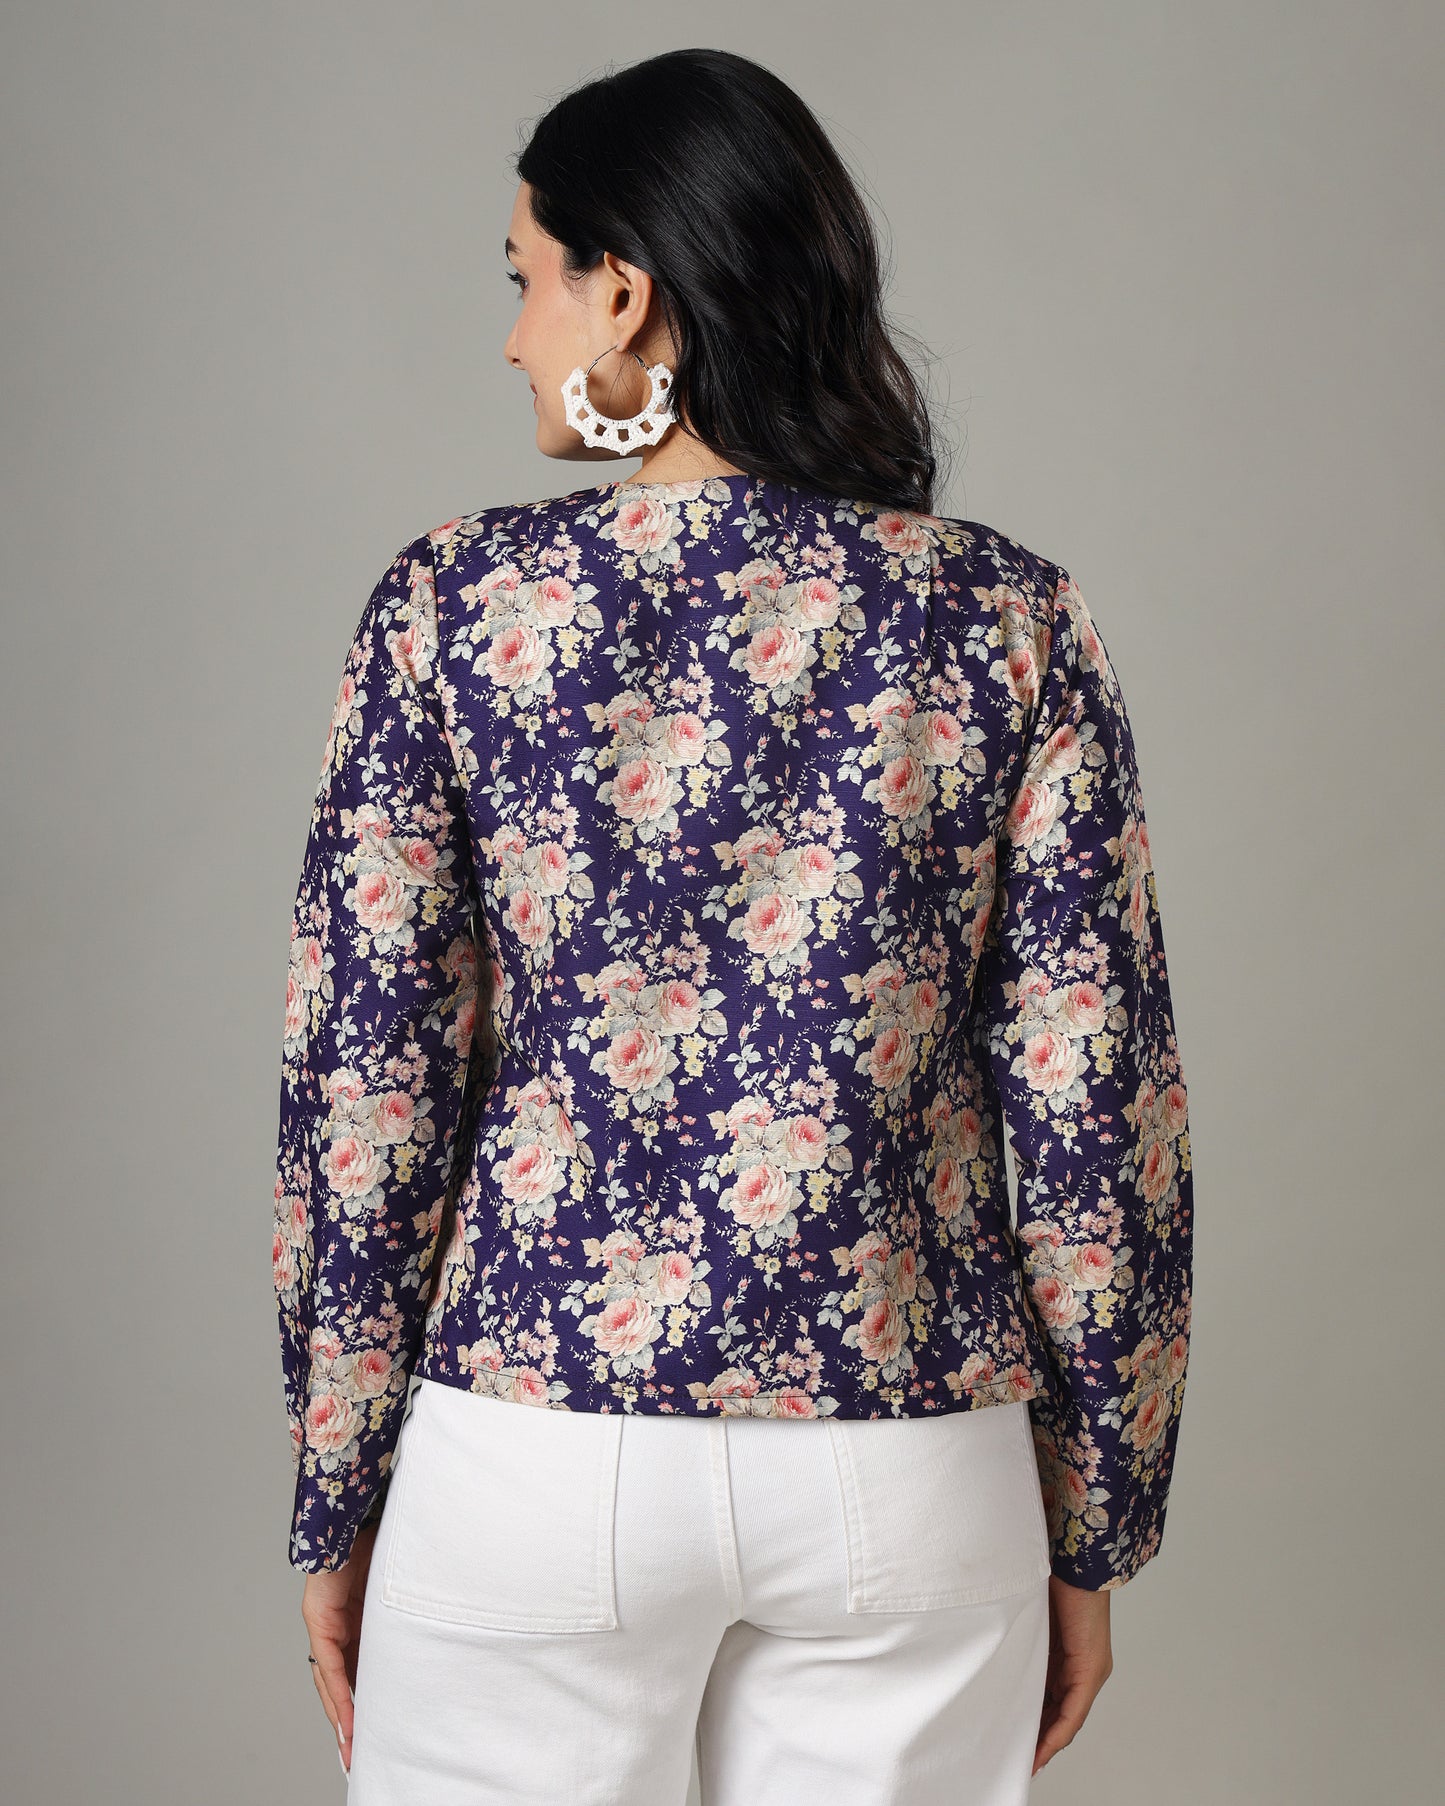 Memories In The Making-Your Event Essential Women's Jacket